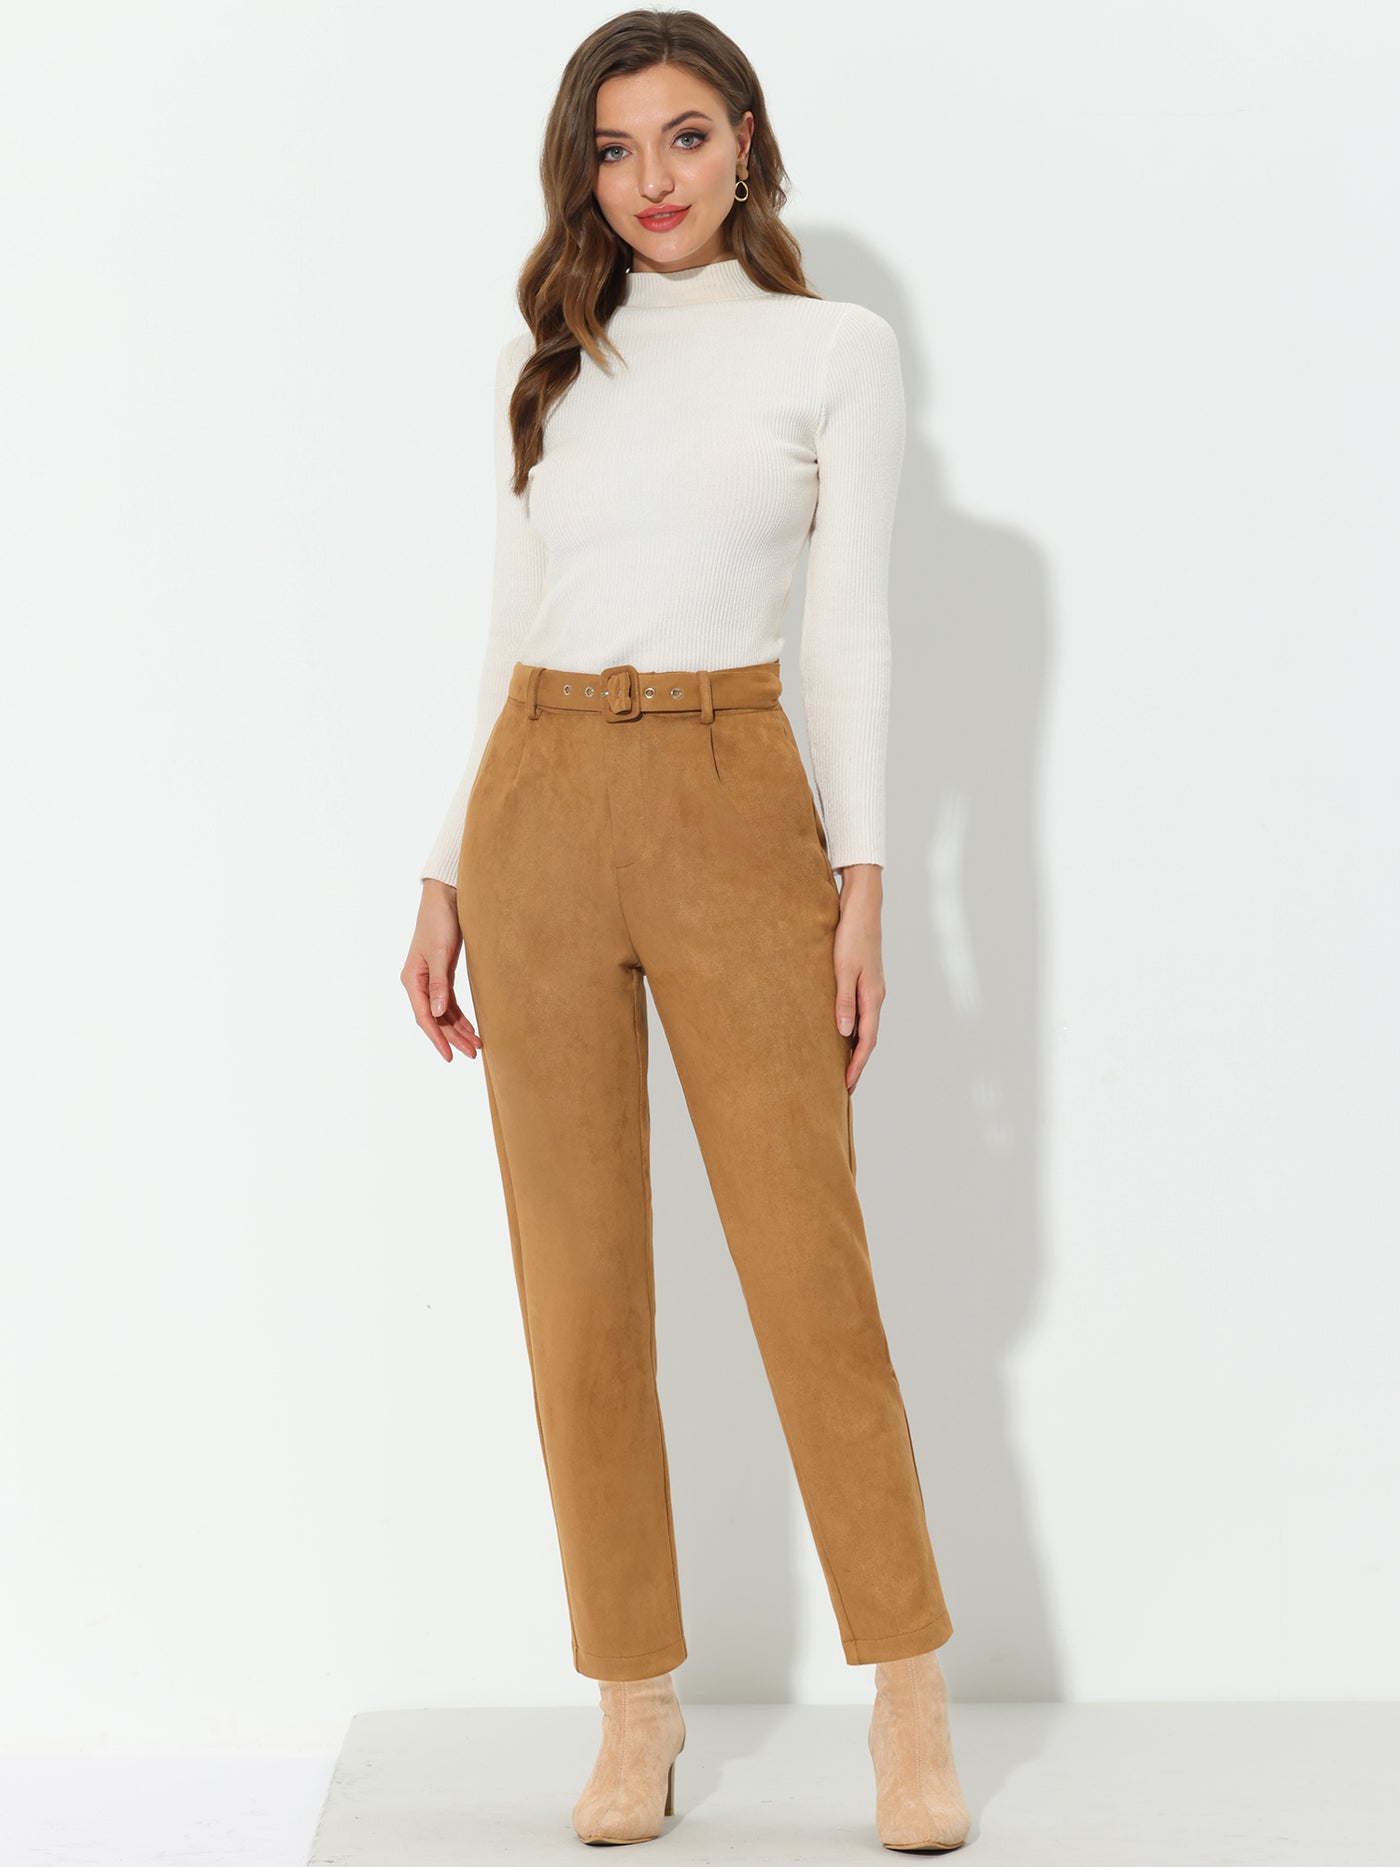 Allegra K Faux Suede Pants Casual High Waist Belted Straight Legs Trousers